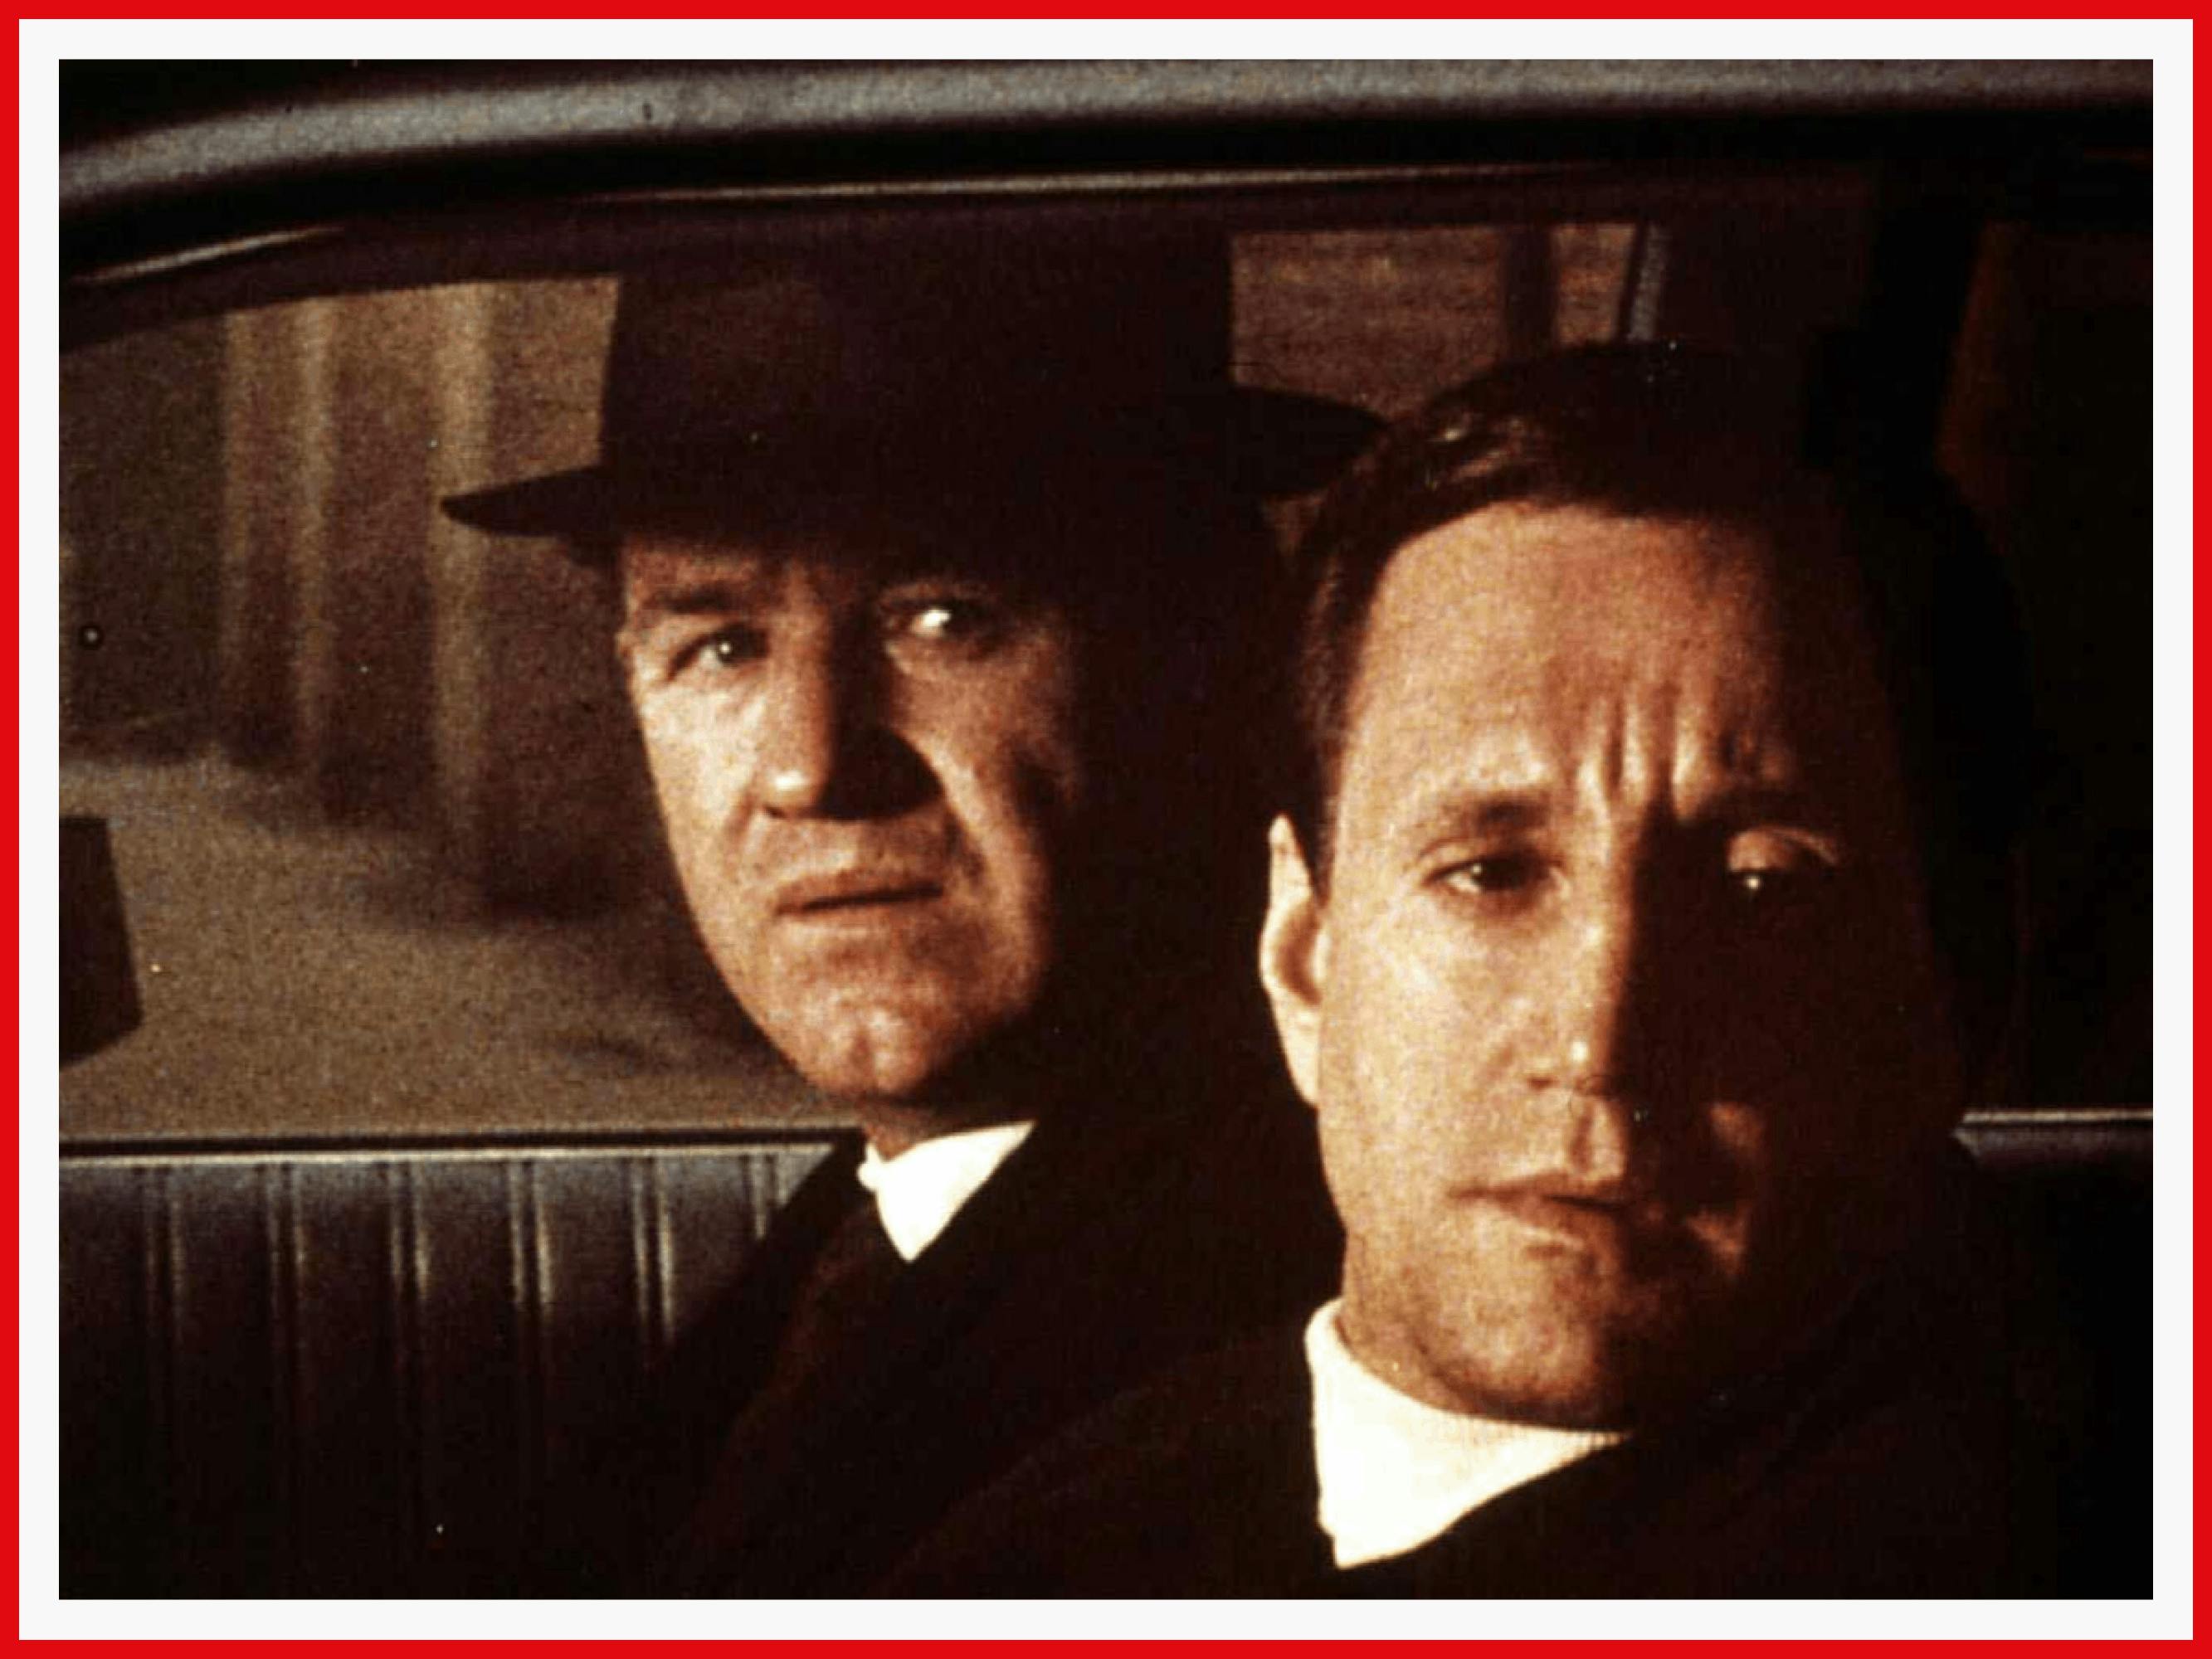 Hackman and Scheider seem to be on to something as Jimmy Doyle and Buddy Russo.